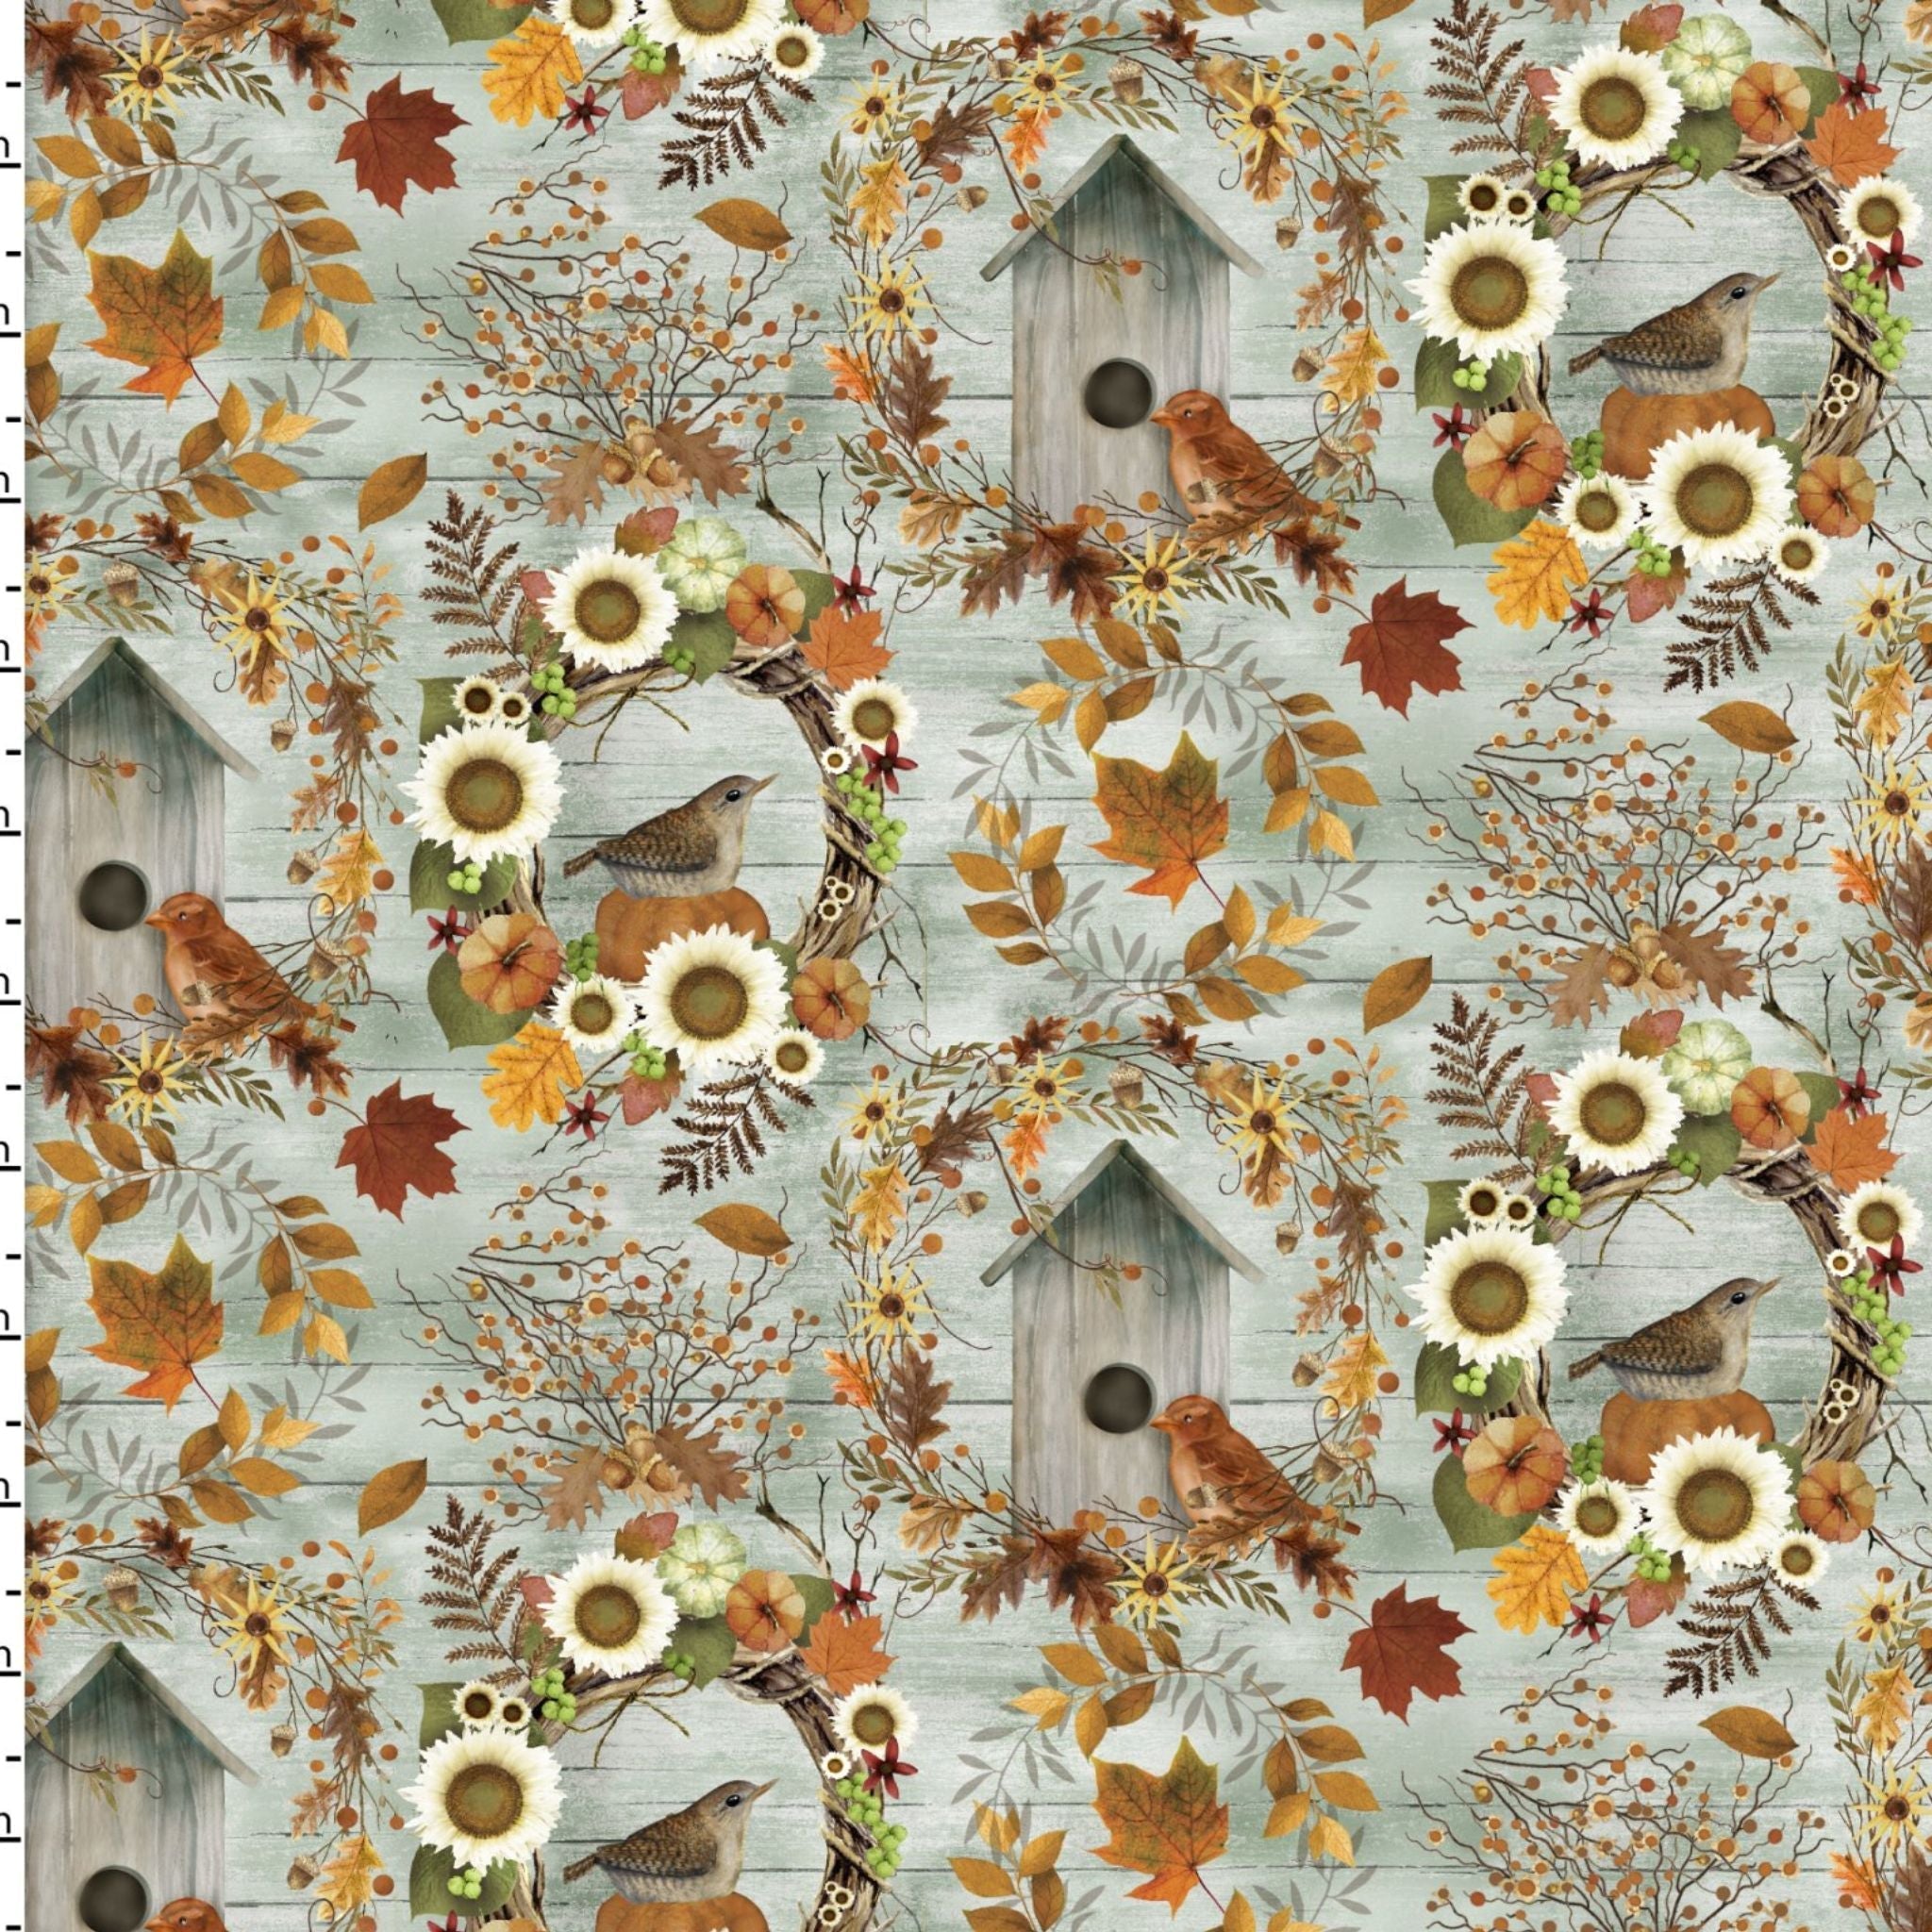 birds and autumn wreaths on whitewashed cotton fabric - The Pick of the Patch by 3 Wishes